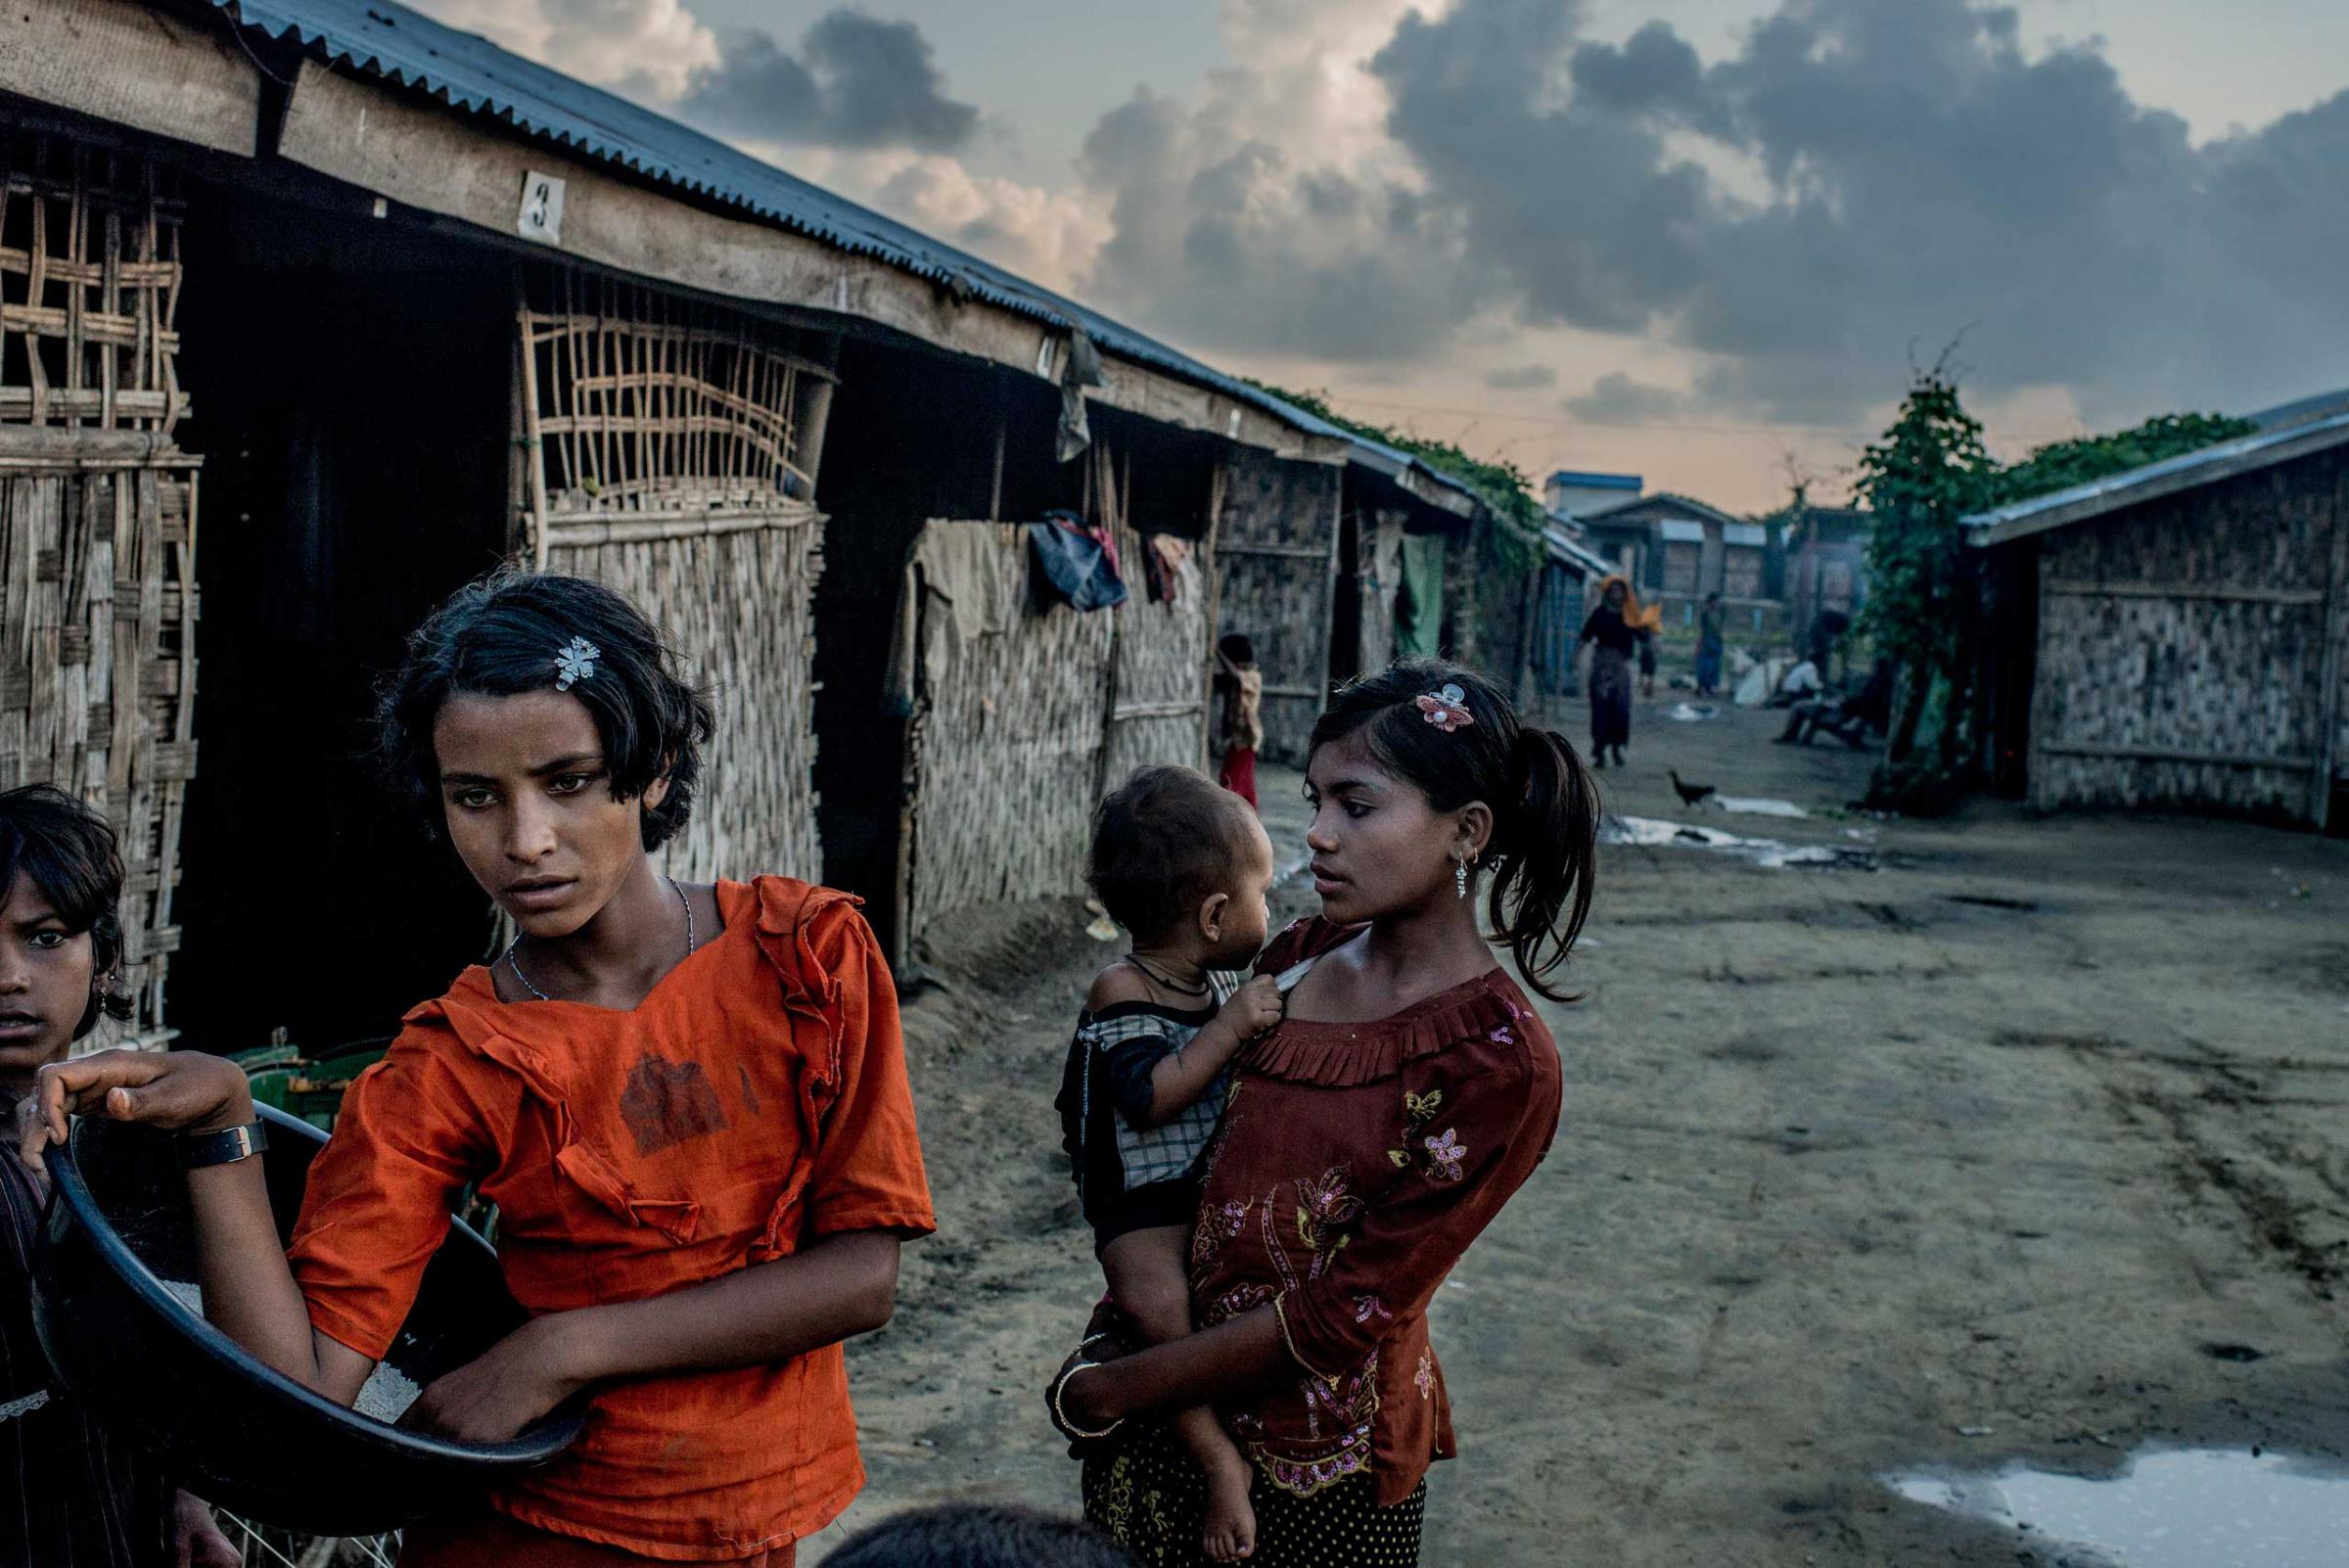 A camp full of Rohingya refugees on the edge of Sittwe, Burma, Oct. 18, 2014.